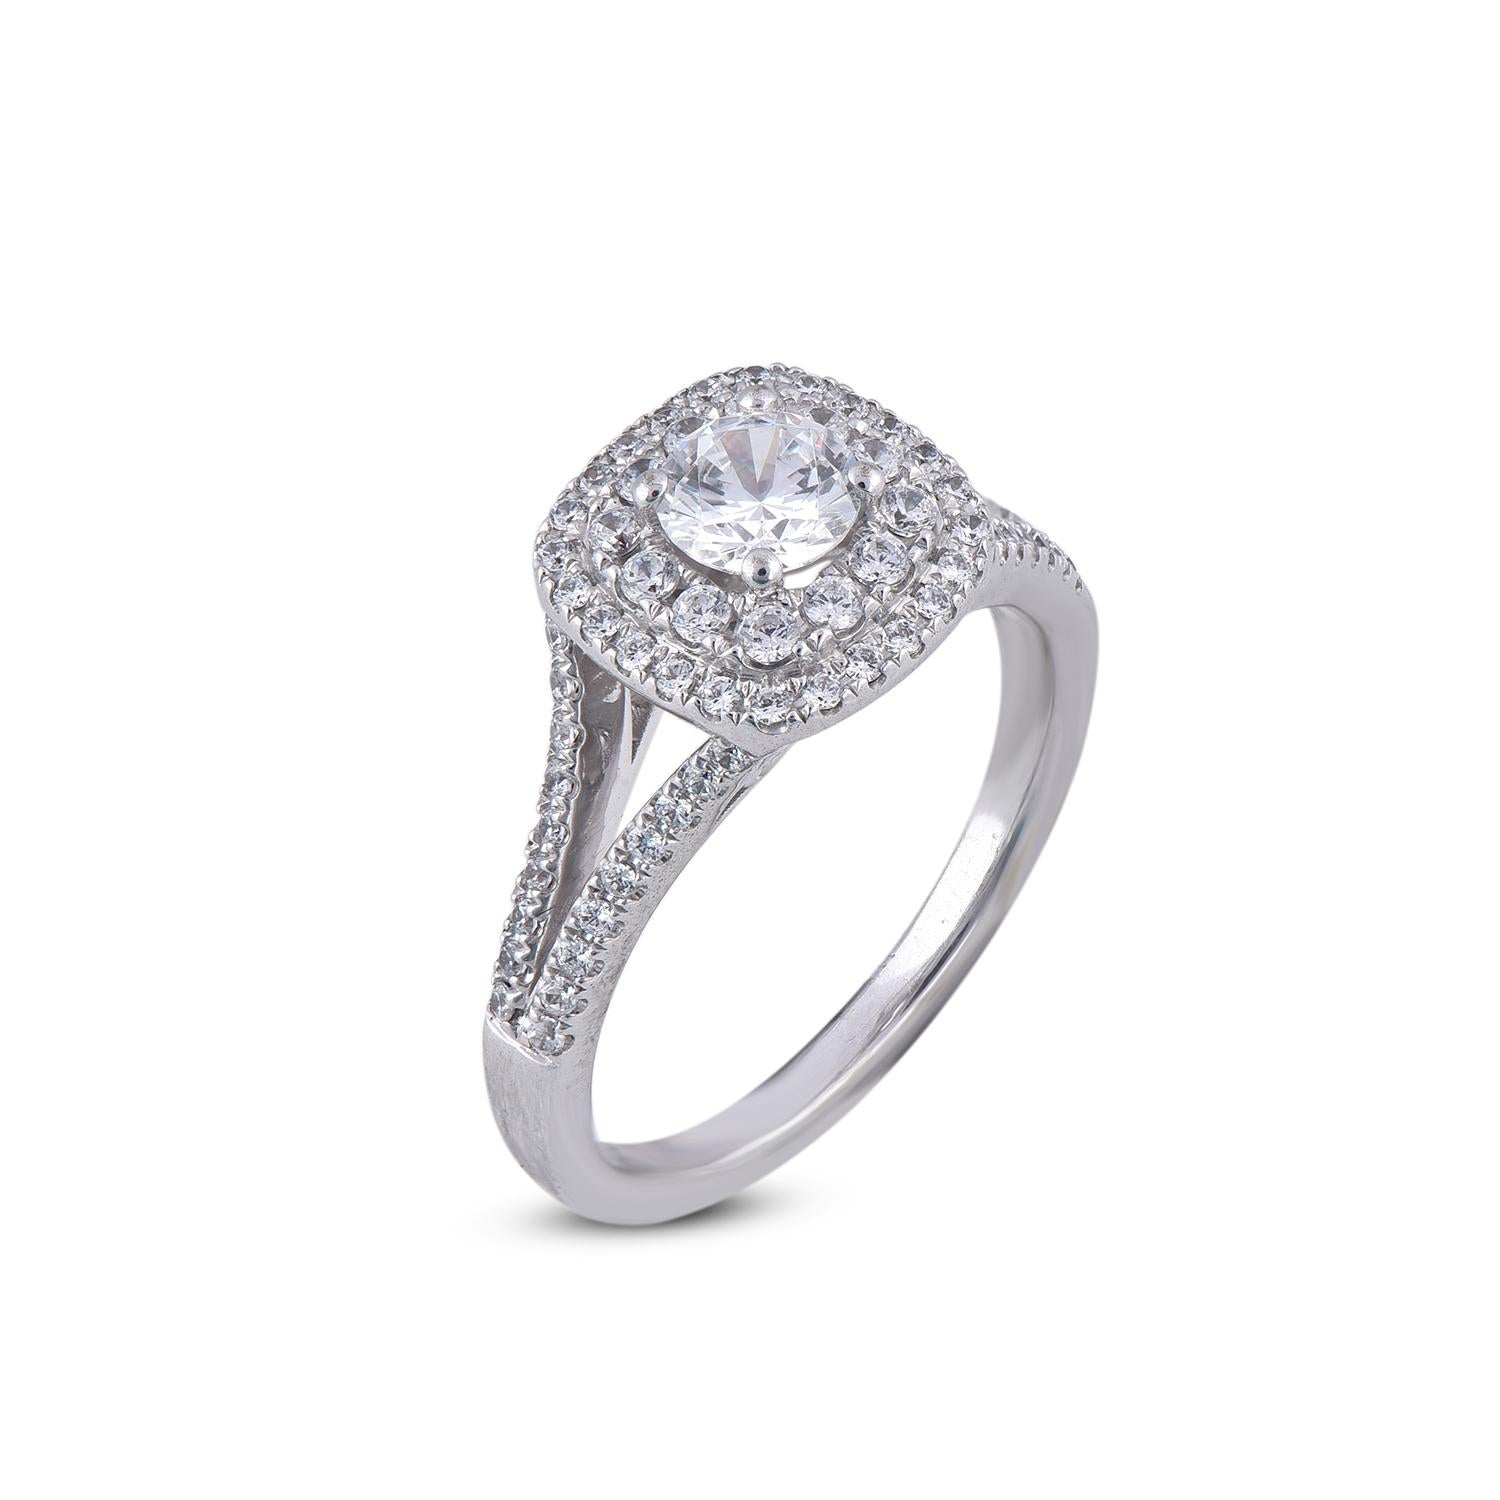 Beautiful Round Natural Diamond Double Frame Engagement Ring. This ring is beautifully designed in 18 karat white gold with 47 round diamond 0.30ct centre stone and 0.15ct diamond frame and shank lined diamonds set in prong setting. The diamond are